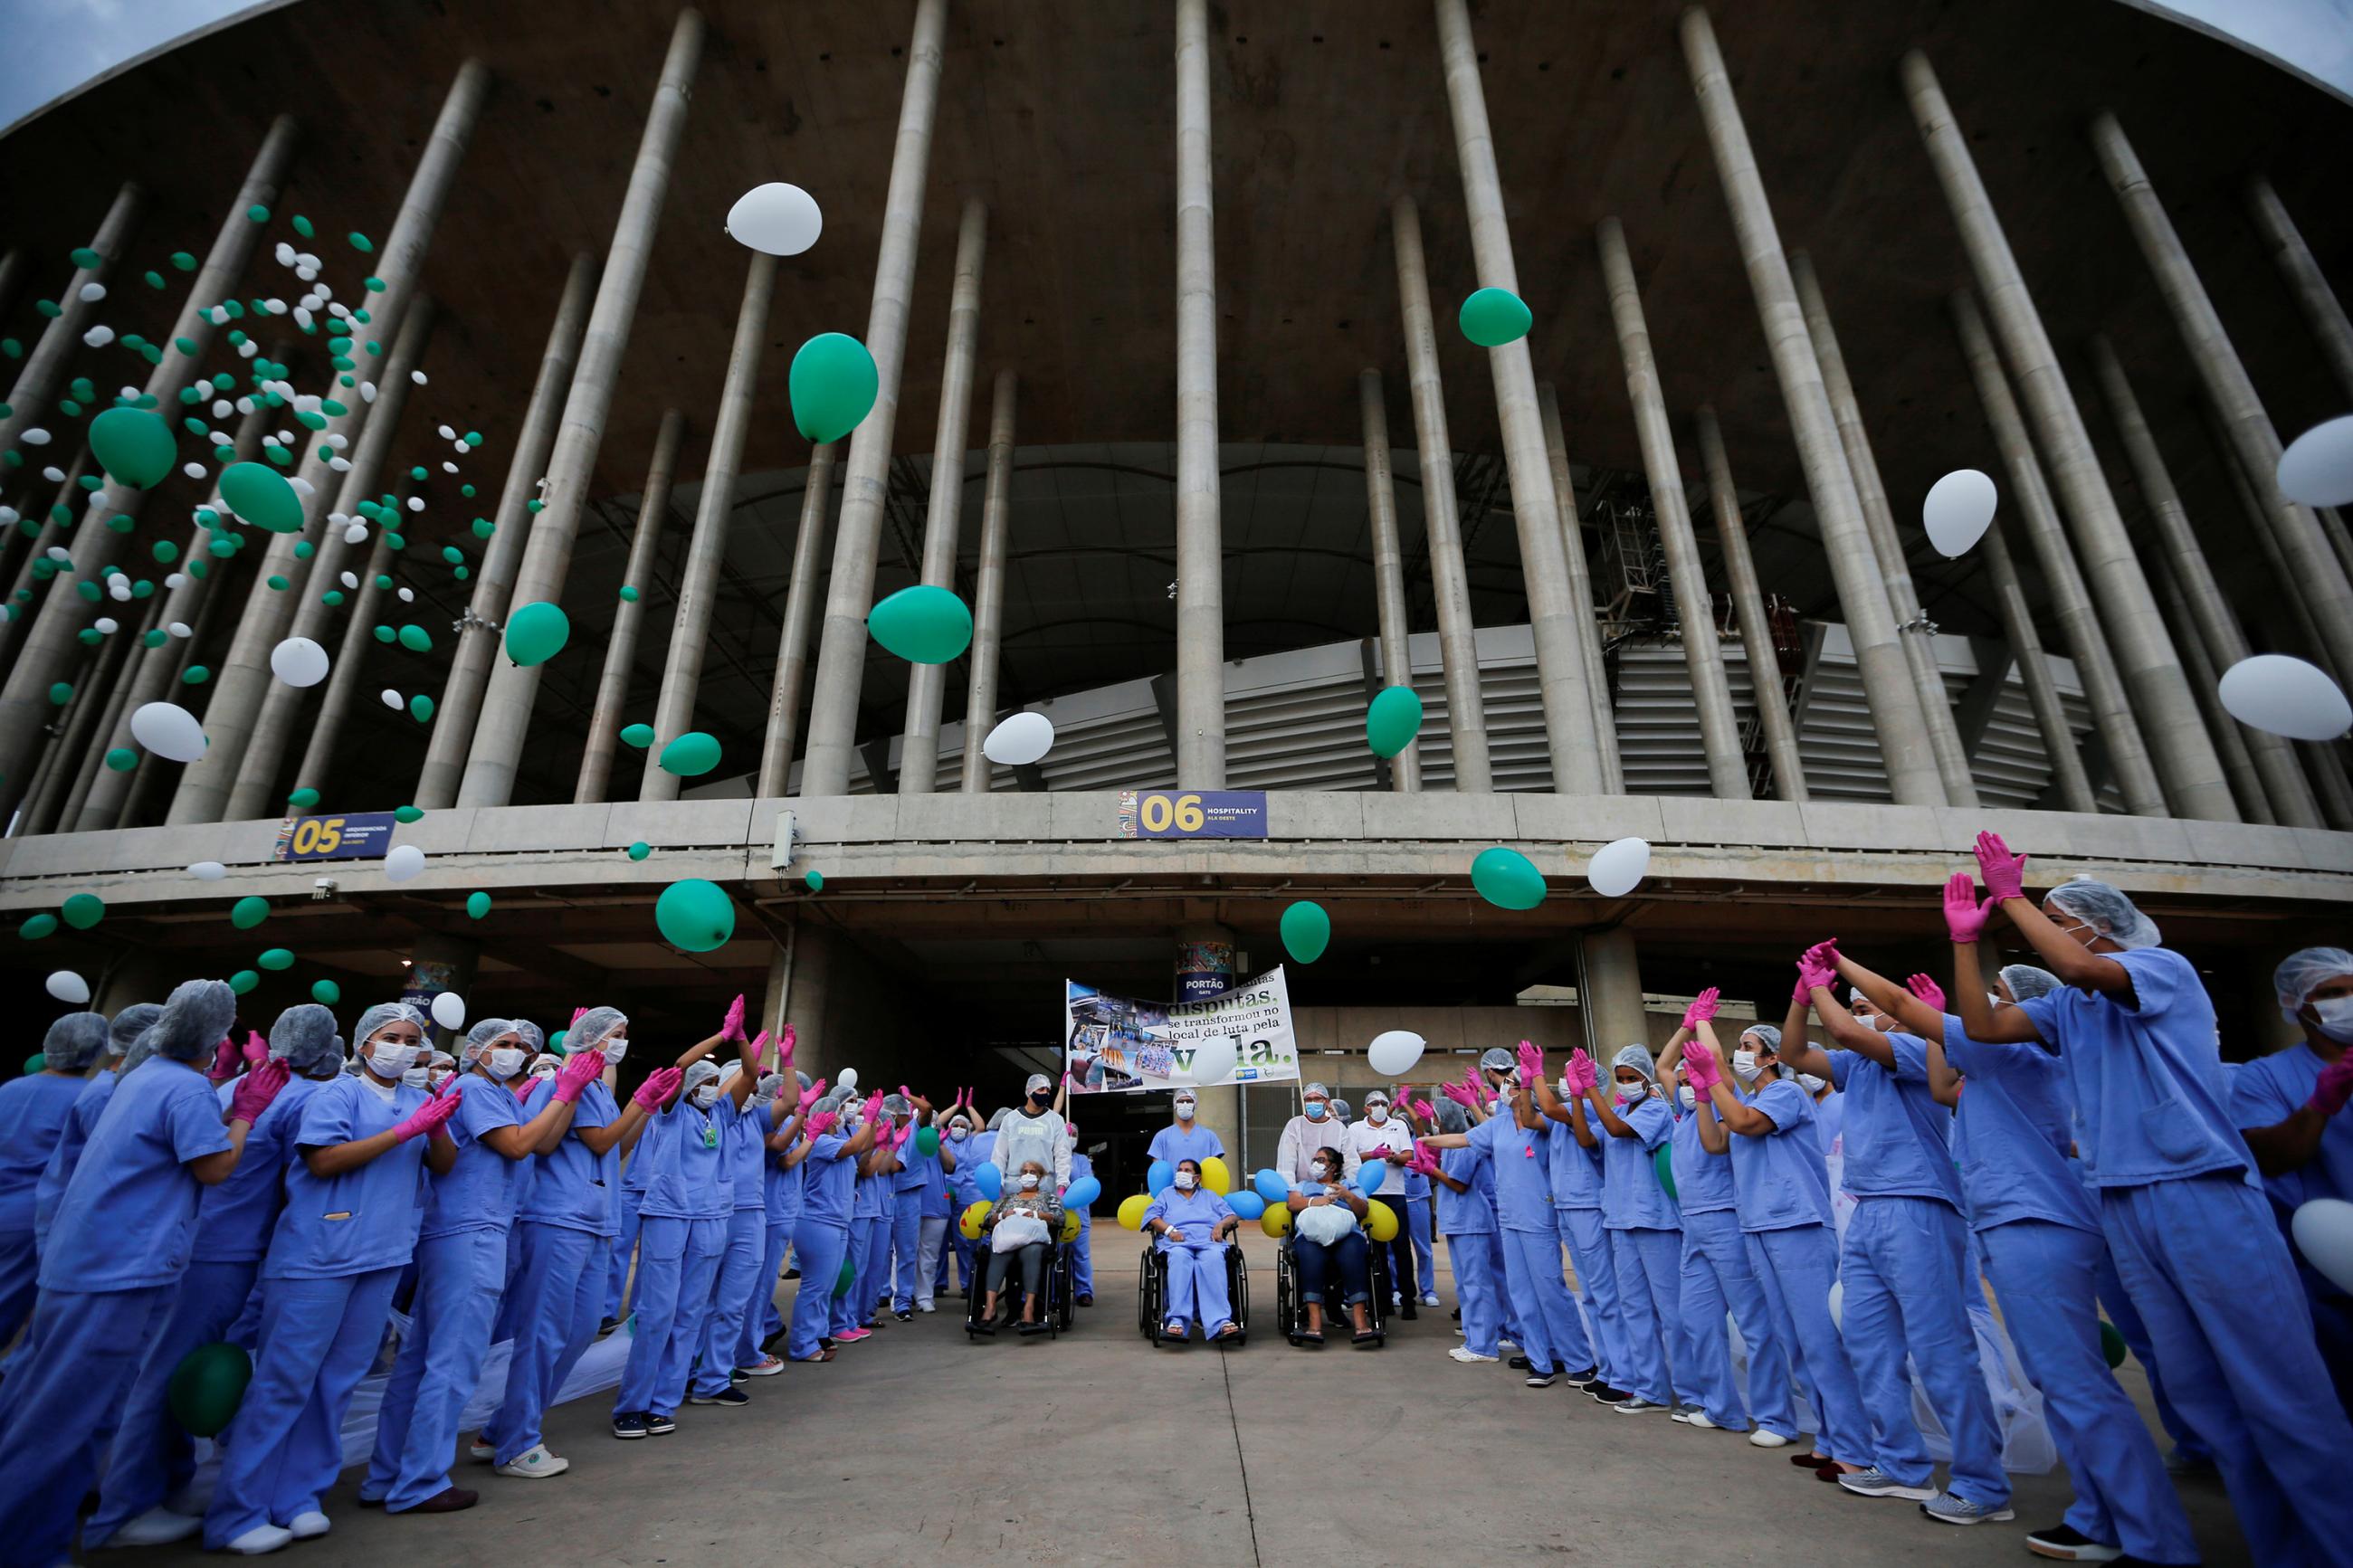 The photo shows a large crowd of blue scrubs wearing health workers cheering and releasing green and white balloons at the entrance of a large stadium. 